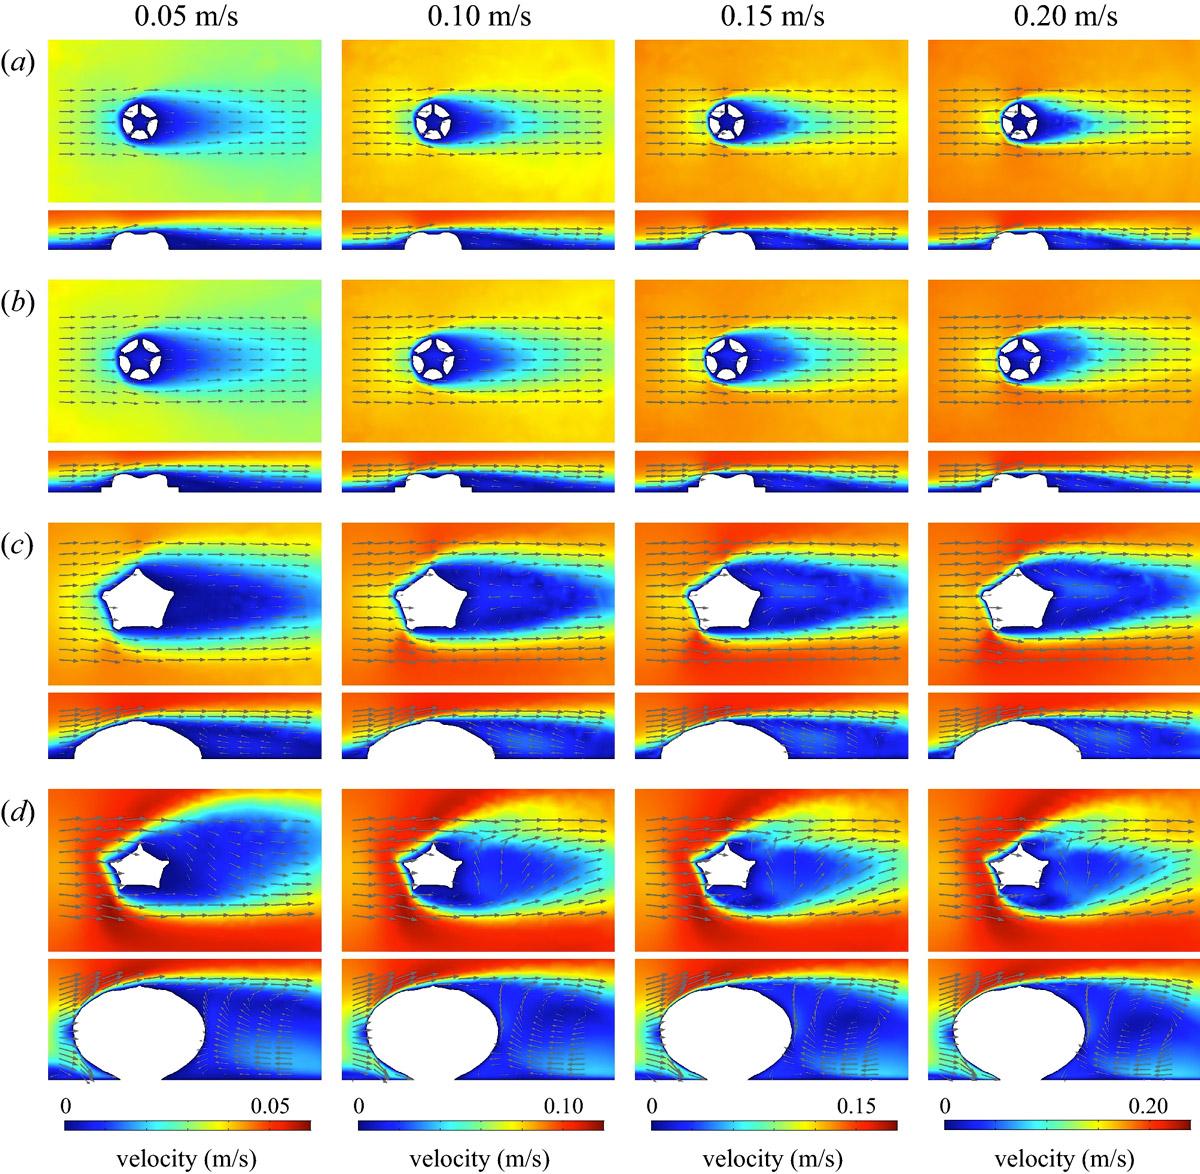 Computational fluid dynamics surface plots (horizontal and vertical cross-sections) at four different speeds over the small and large Arkarua models (top) and the 2 echinoderms (bottom). Arrows indicate direction of water flow and colours indicate speed.